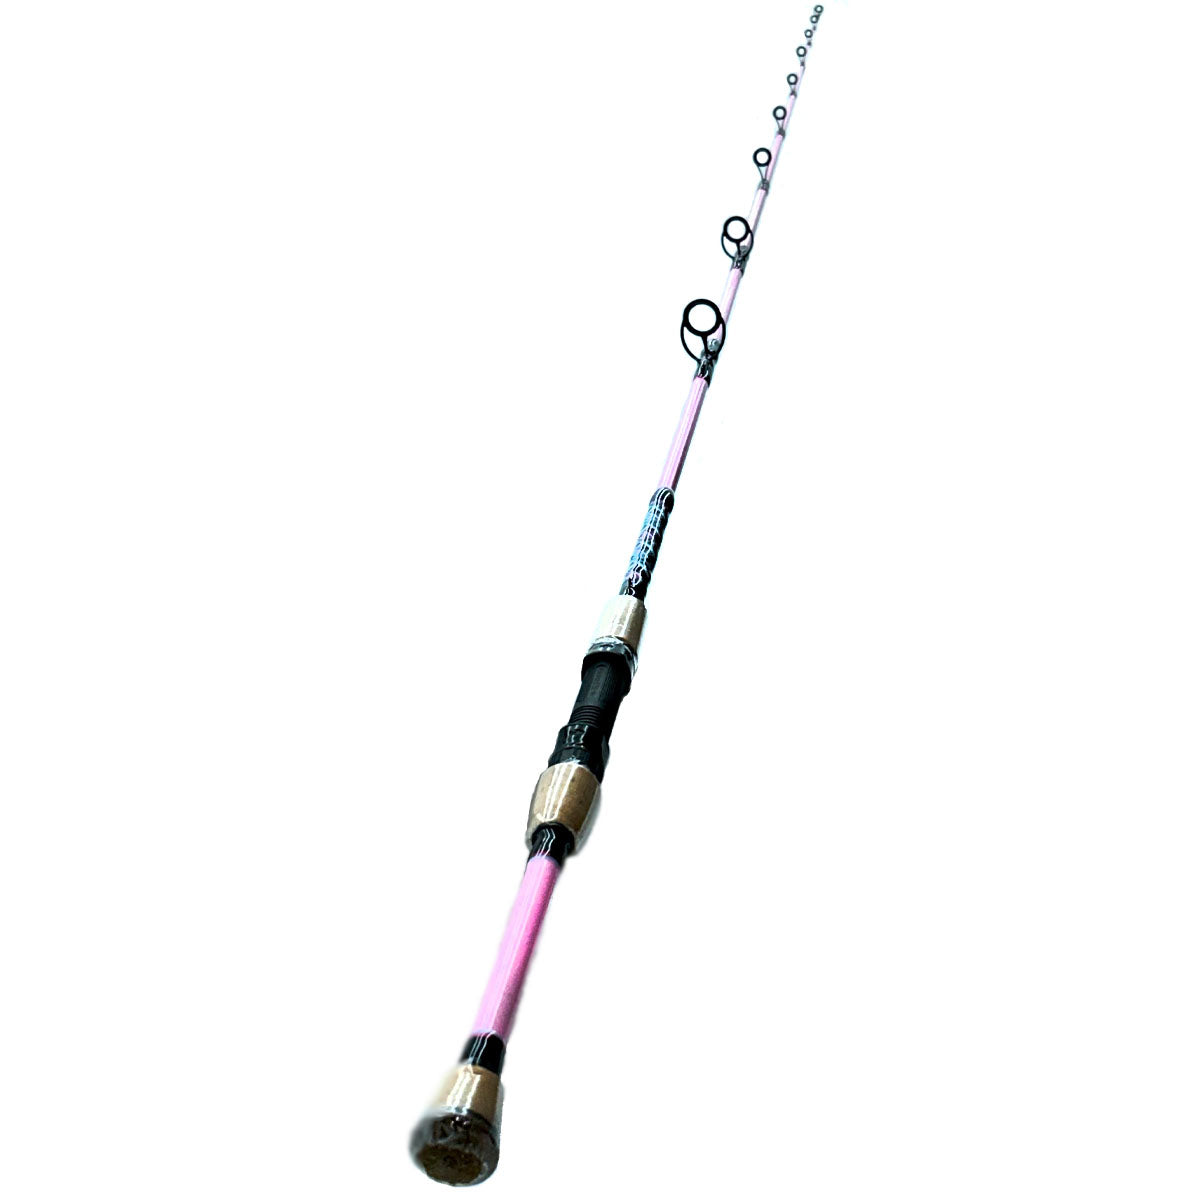 #27 Limited Edition Pink Series CE07H 7' 10-17lb Heavy Inshore Rod